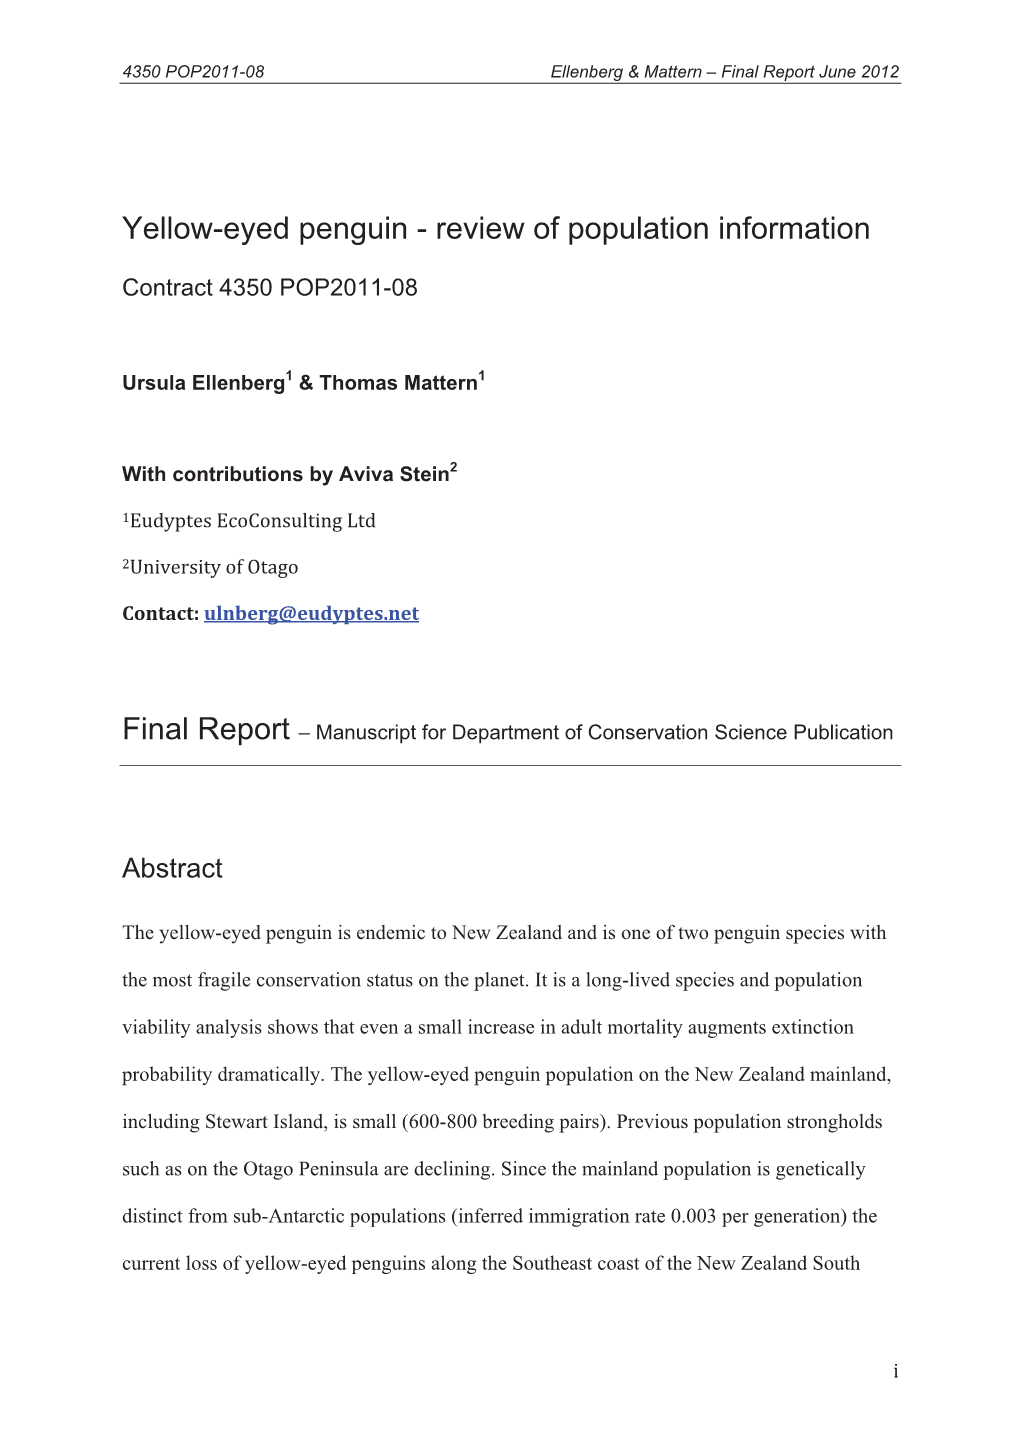 Yellow-Eyed Penguin - Review of Population Information